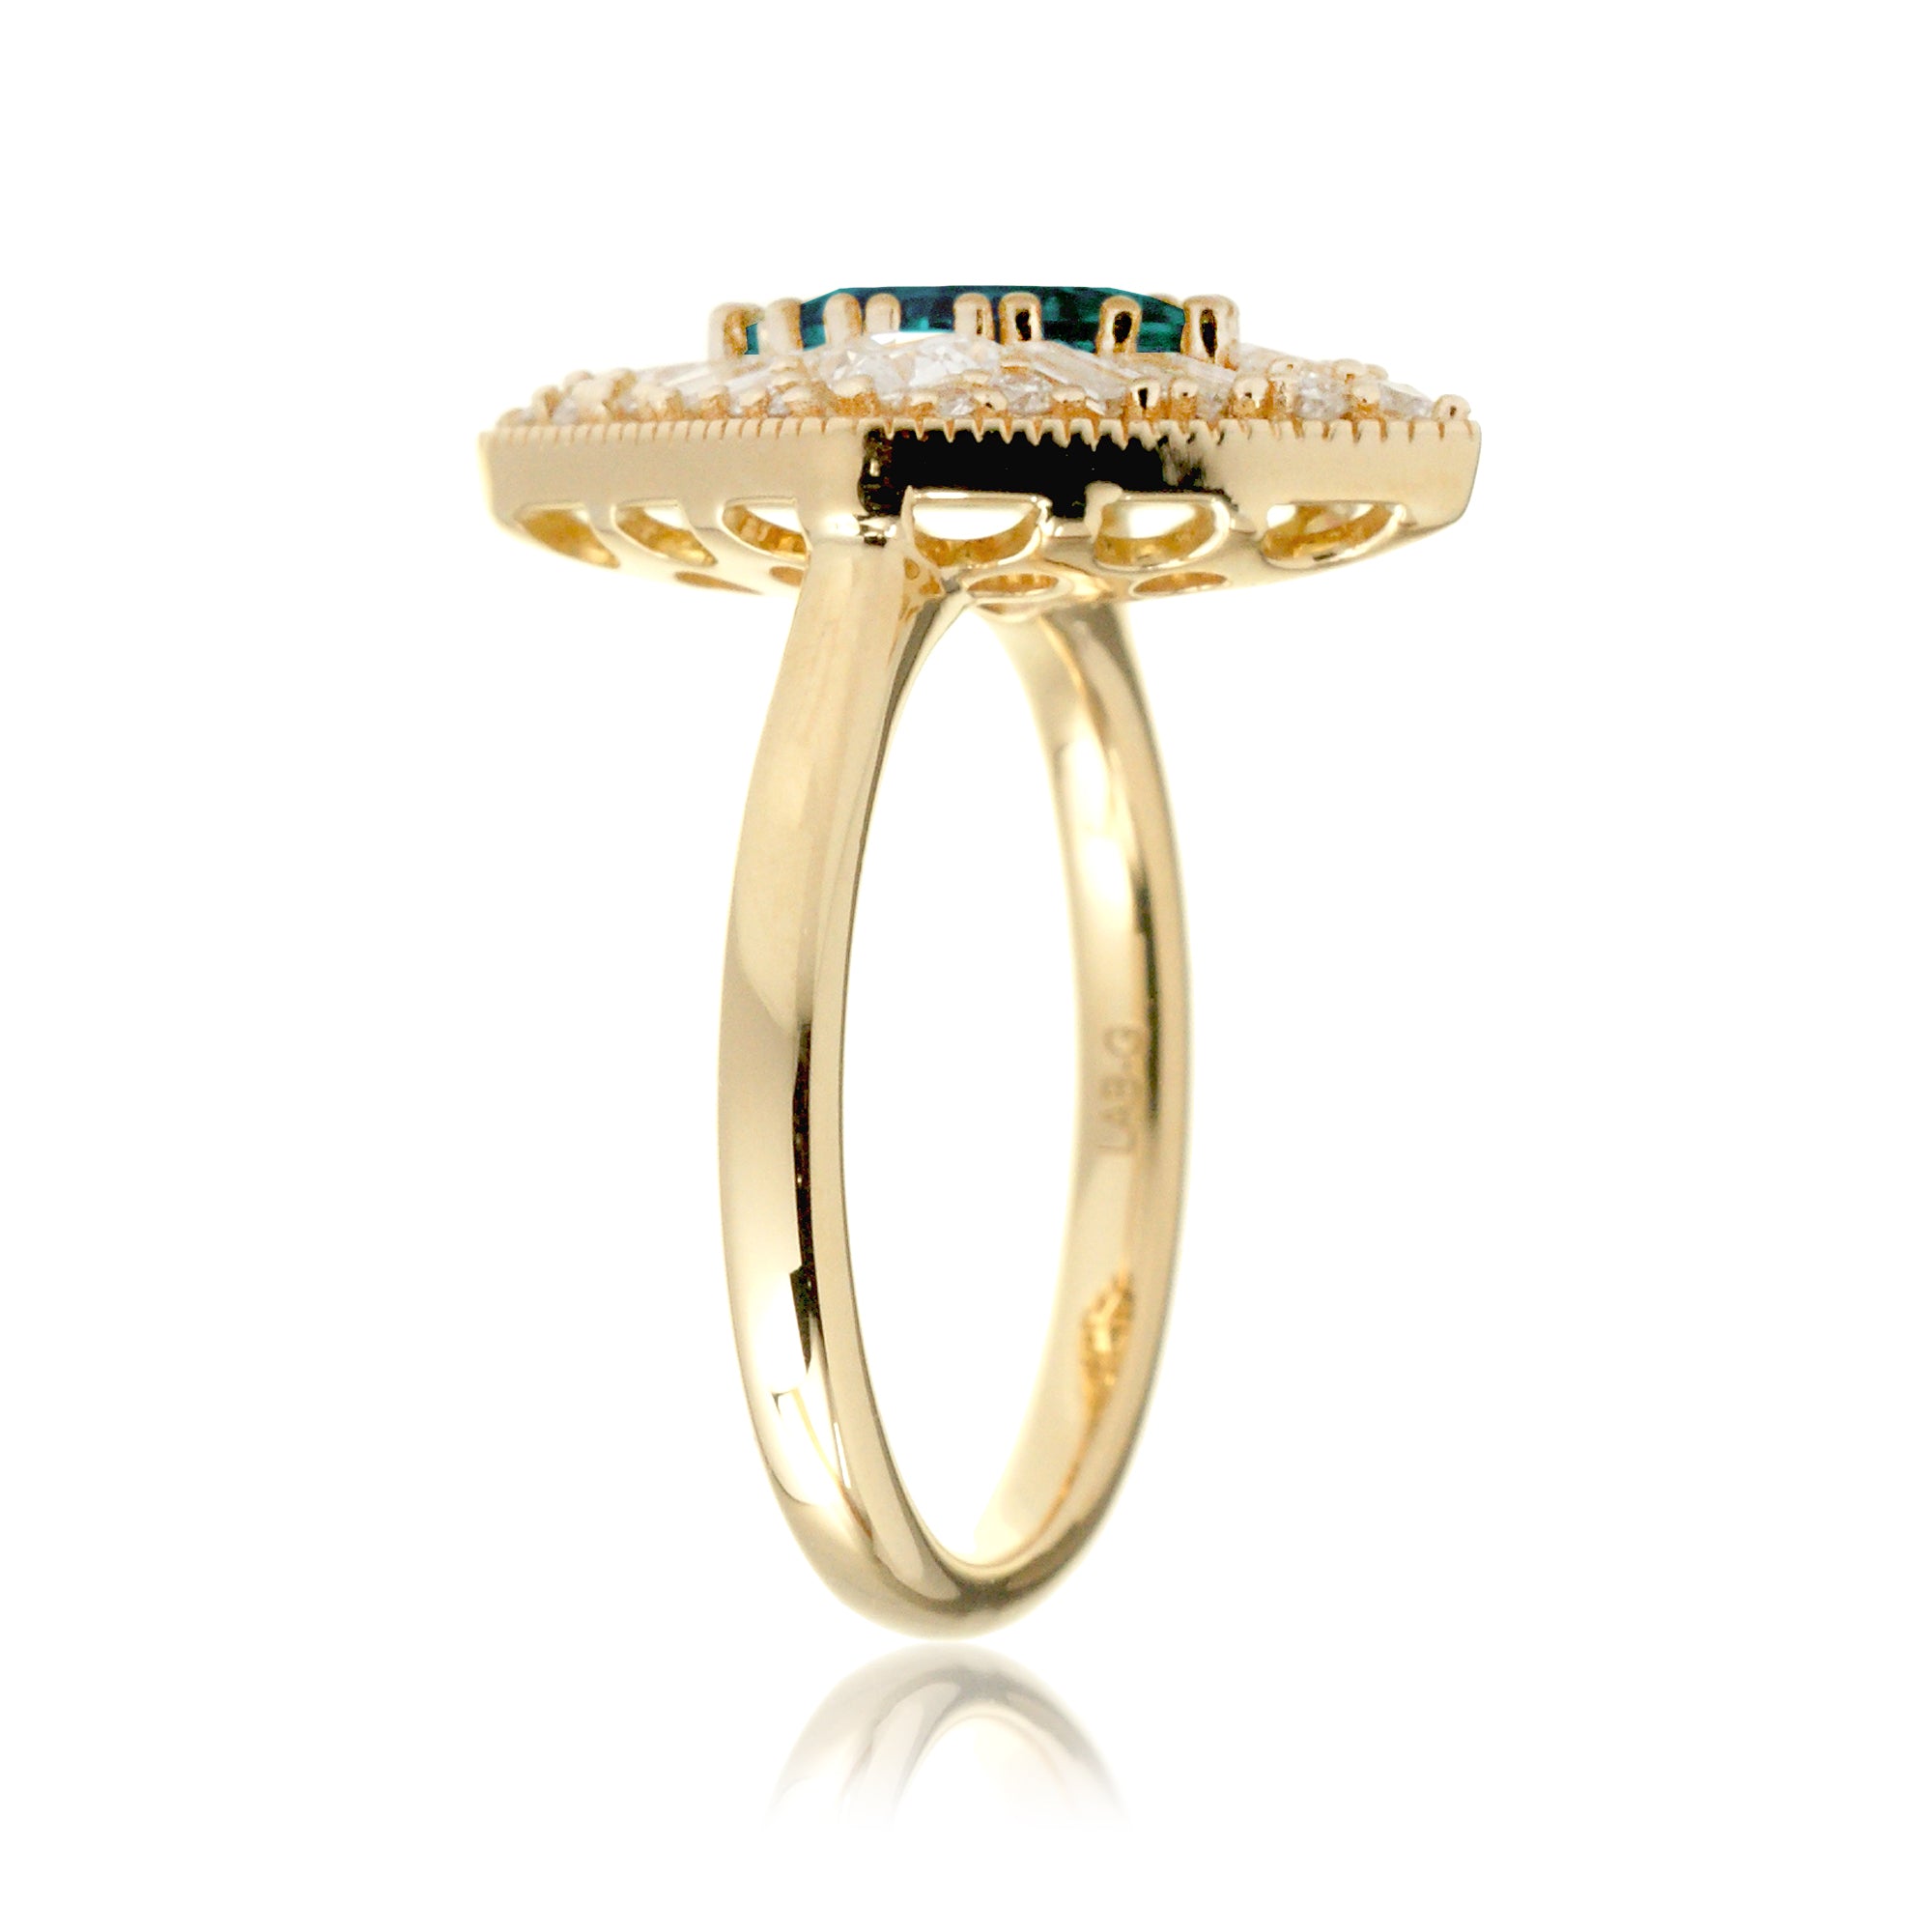 Kite cut green emerald and diamond vintage halo ring in yellow gold